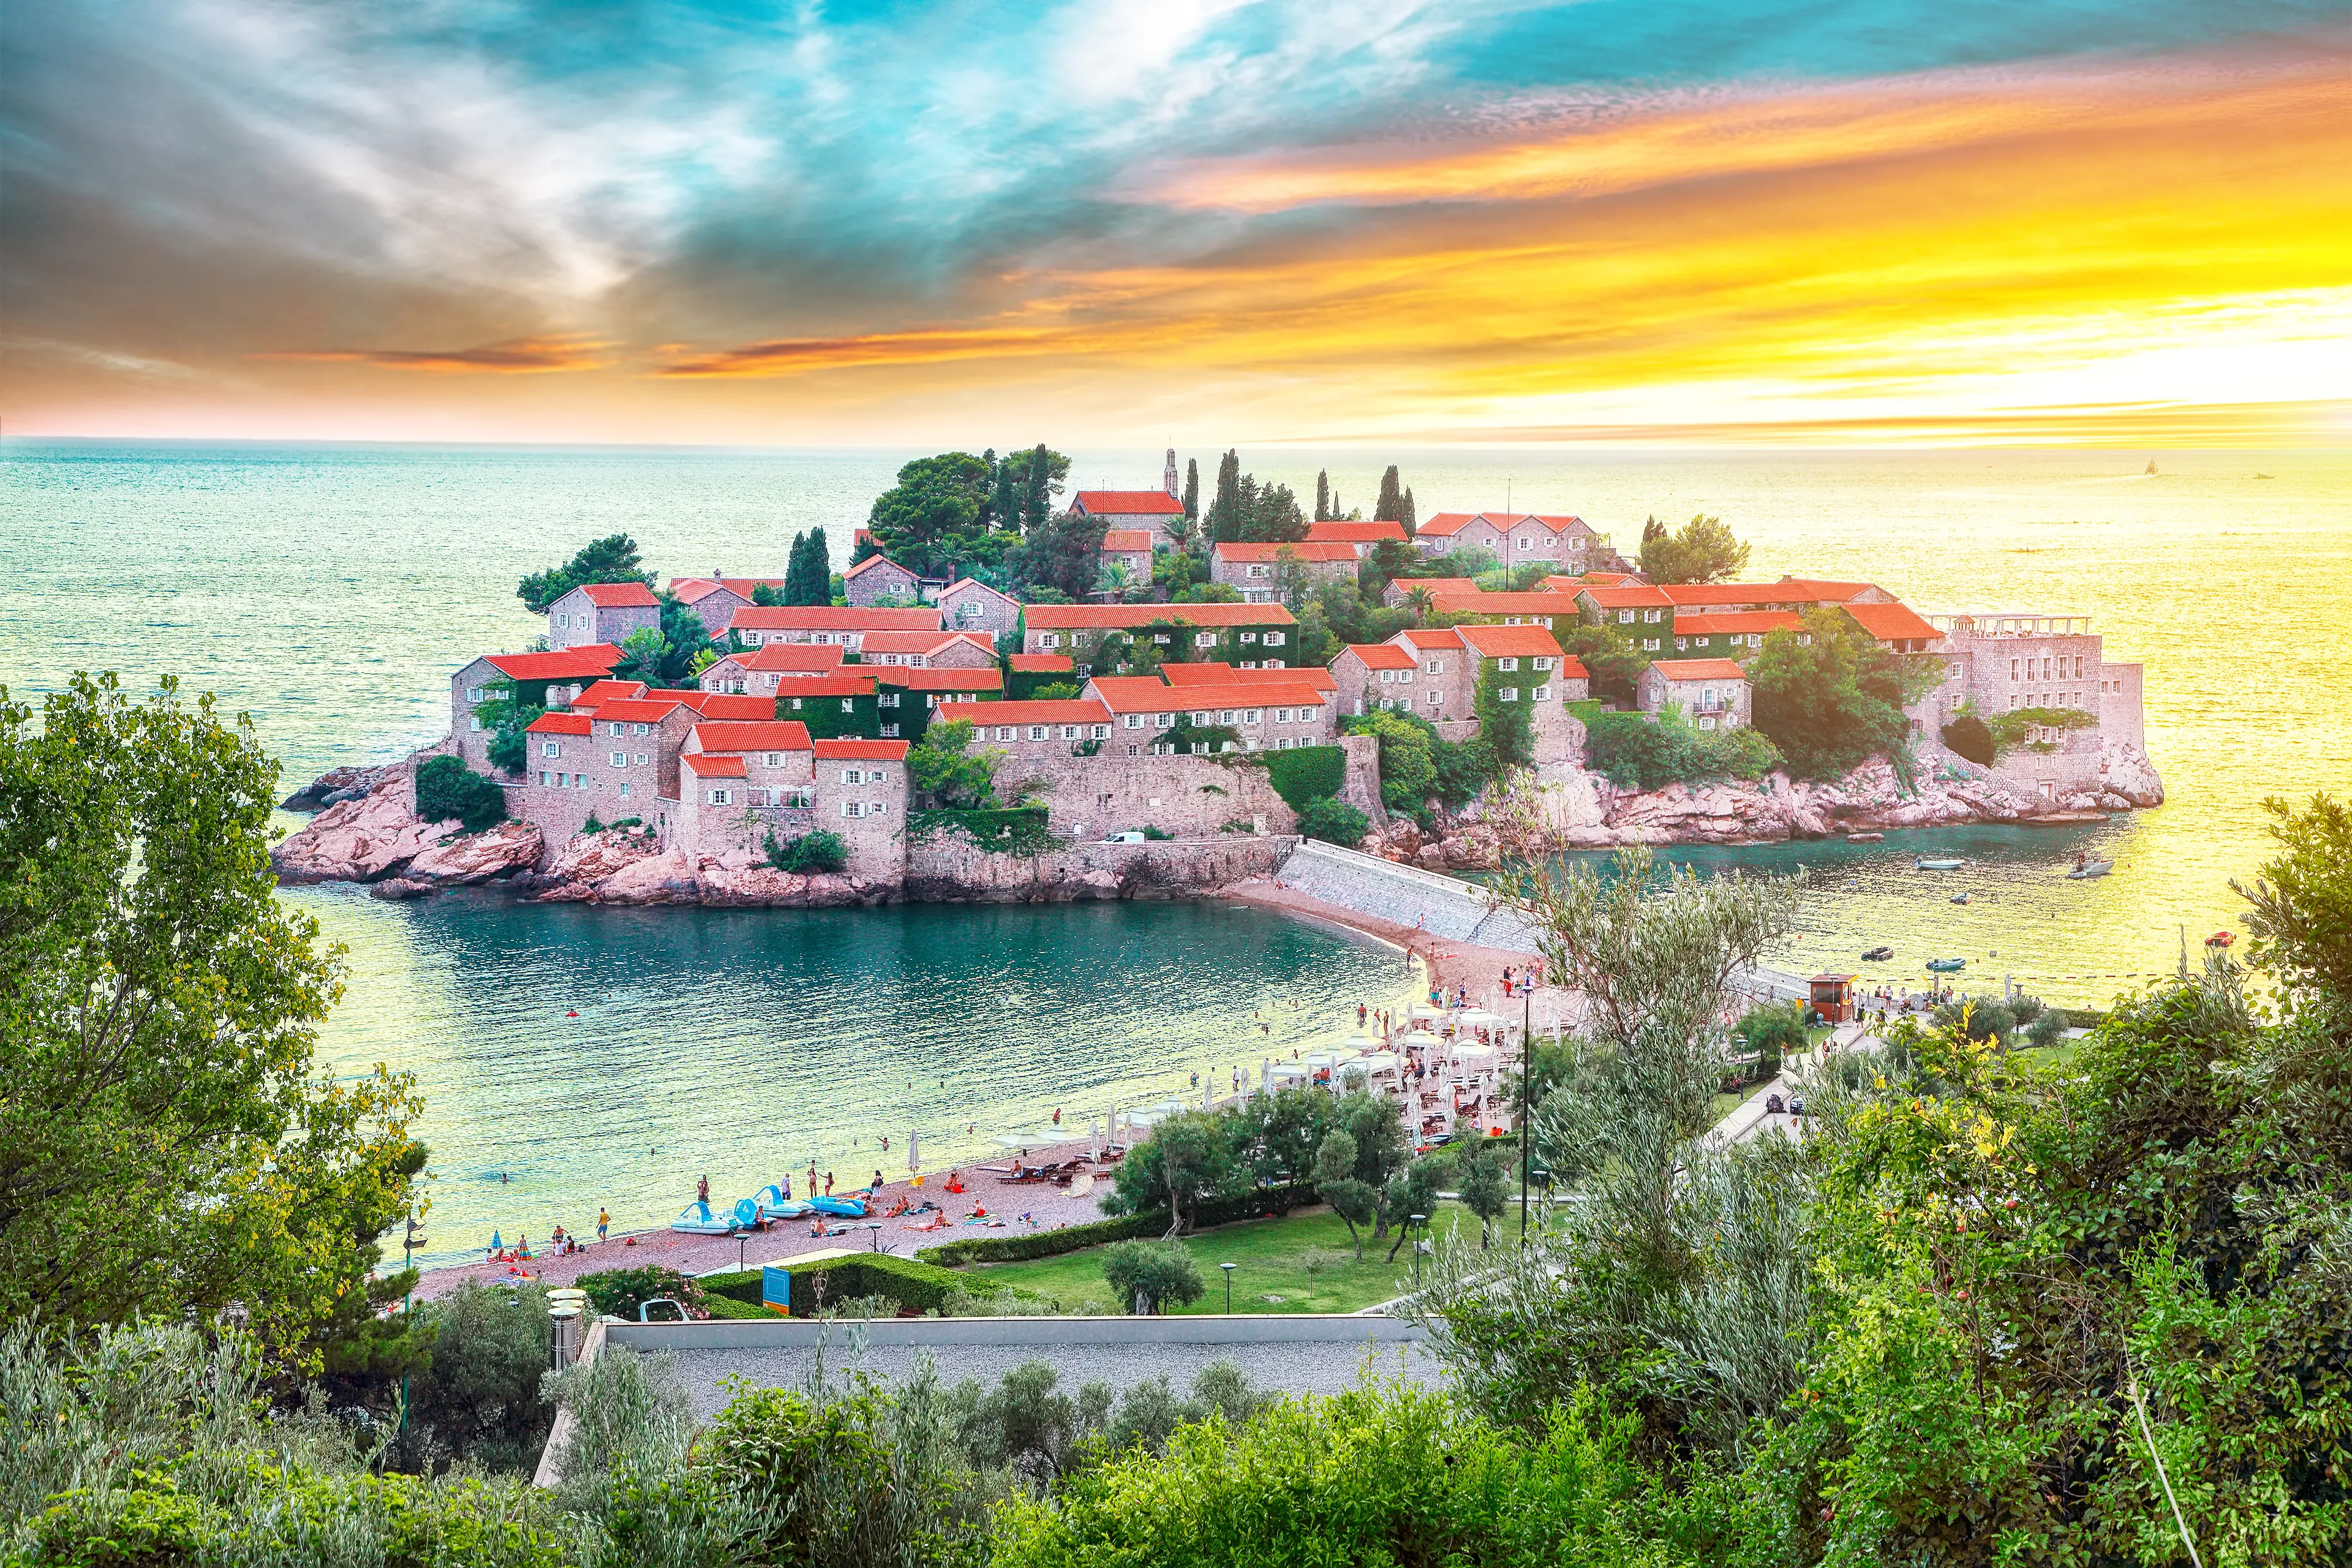 2-Day Romantic Relaxation & Sightseeing Tour in Budva, Montenegro